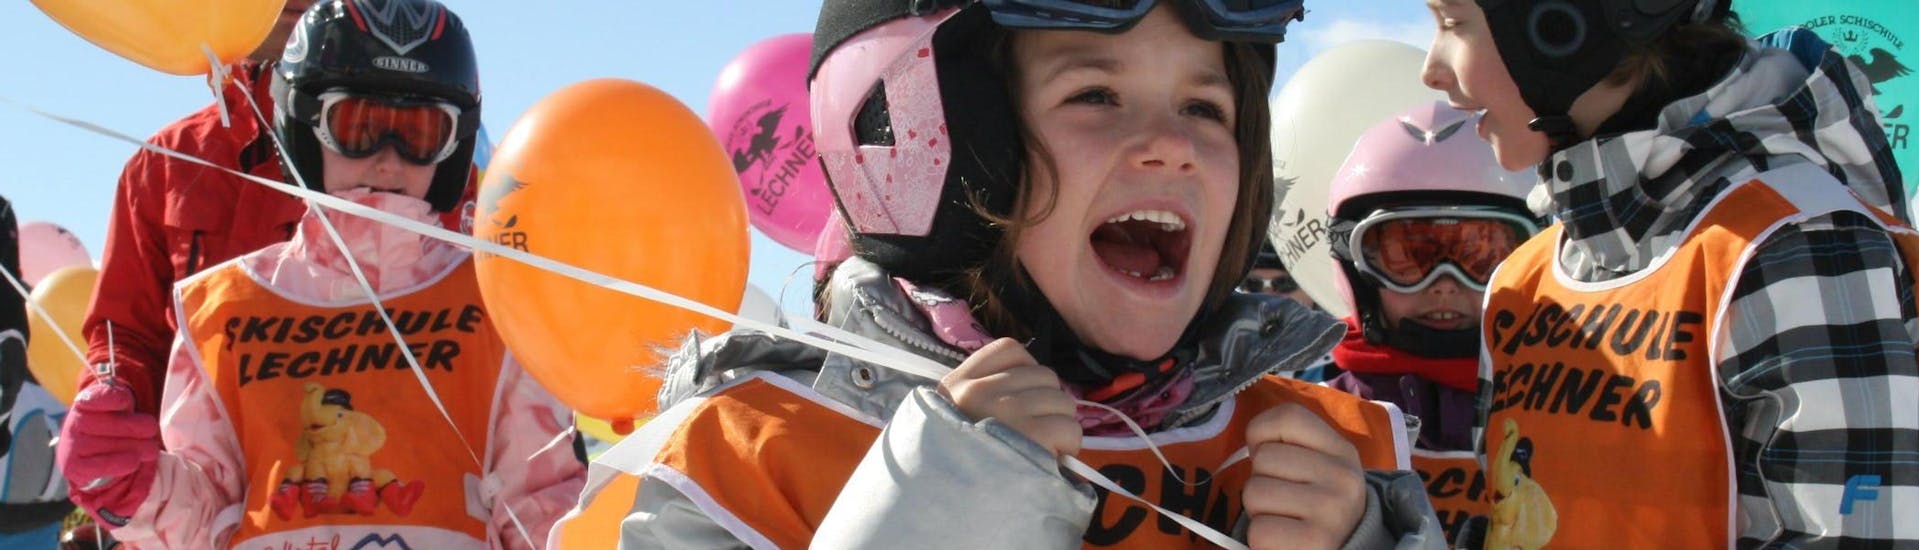 Several children taking part in the Private Ski Lessons for Kids - All Ages organised by the ski school Skischule Lechner are holding balloons with the ski school's logo printed on them.